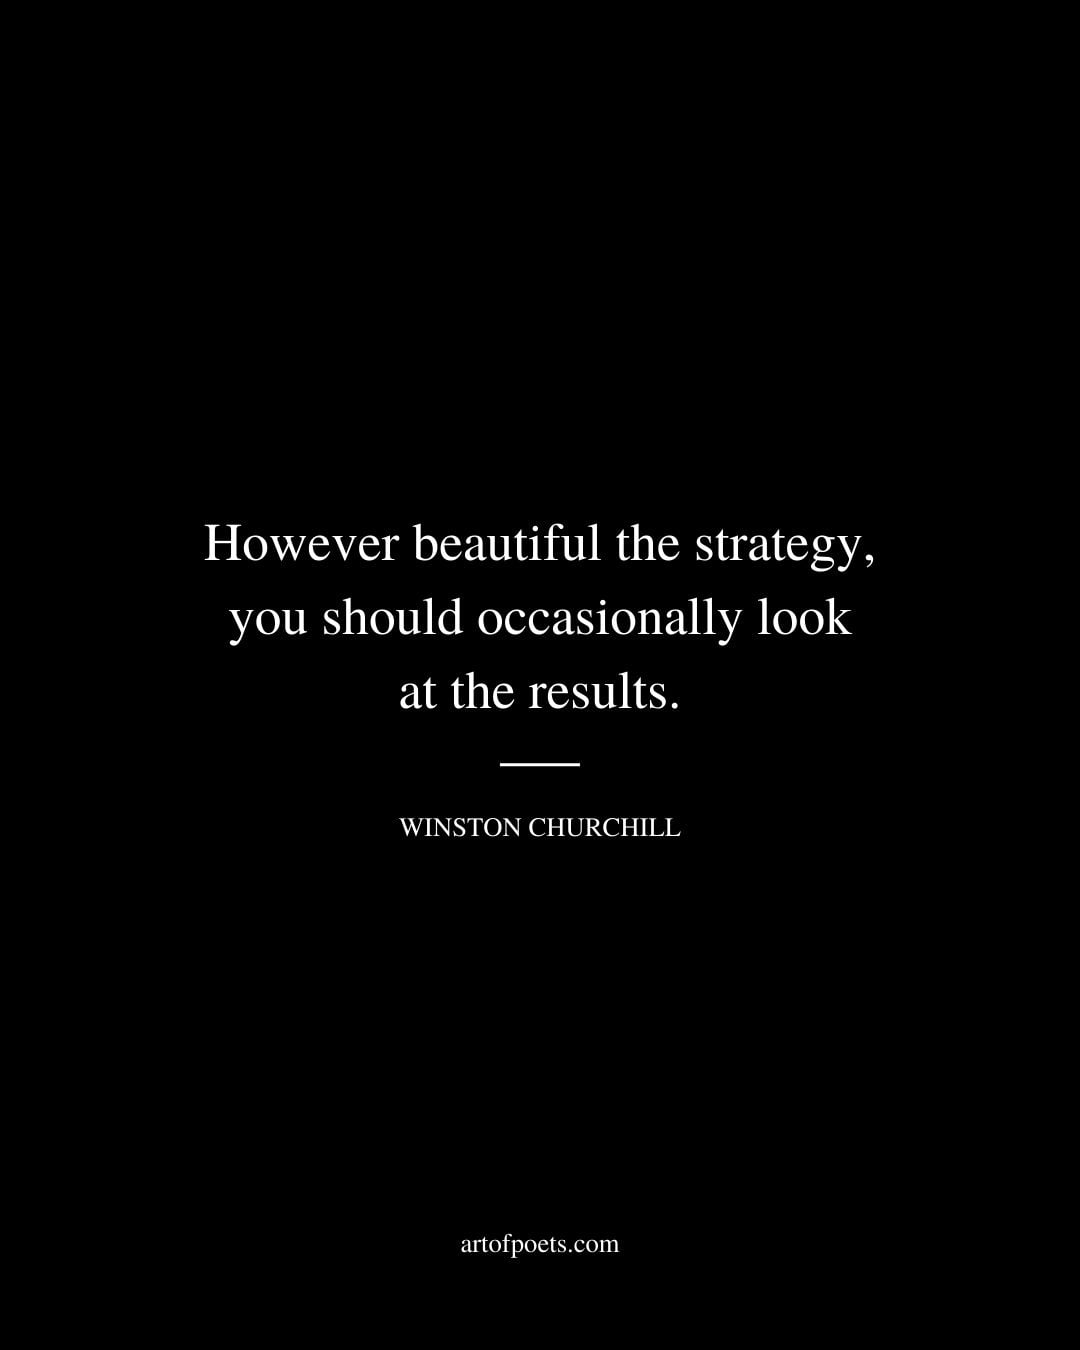 However beautiful the strategy you should occasionally look at the results